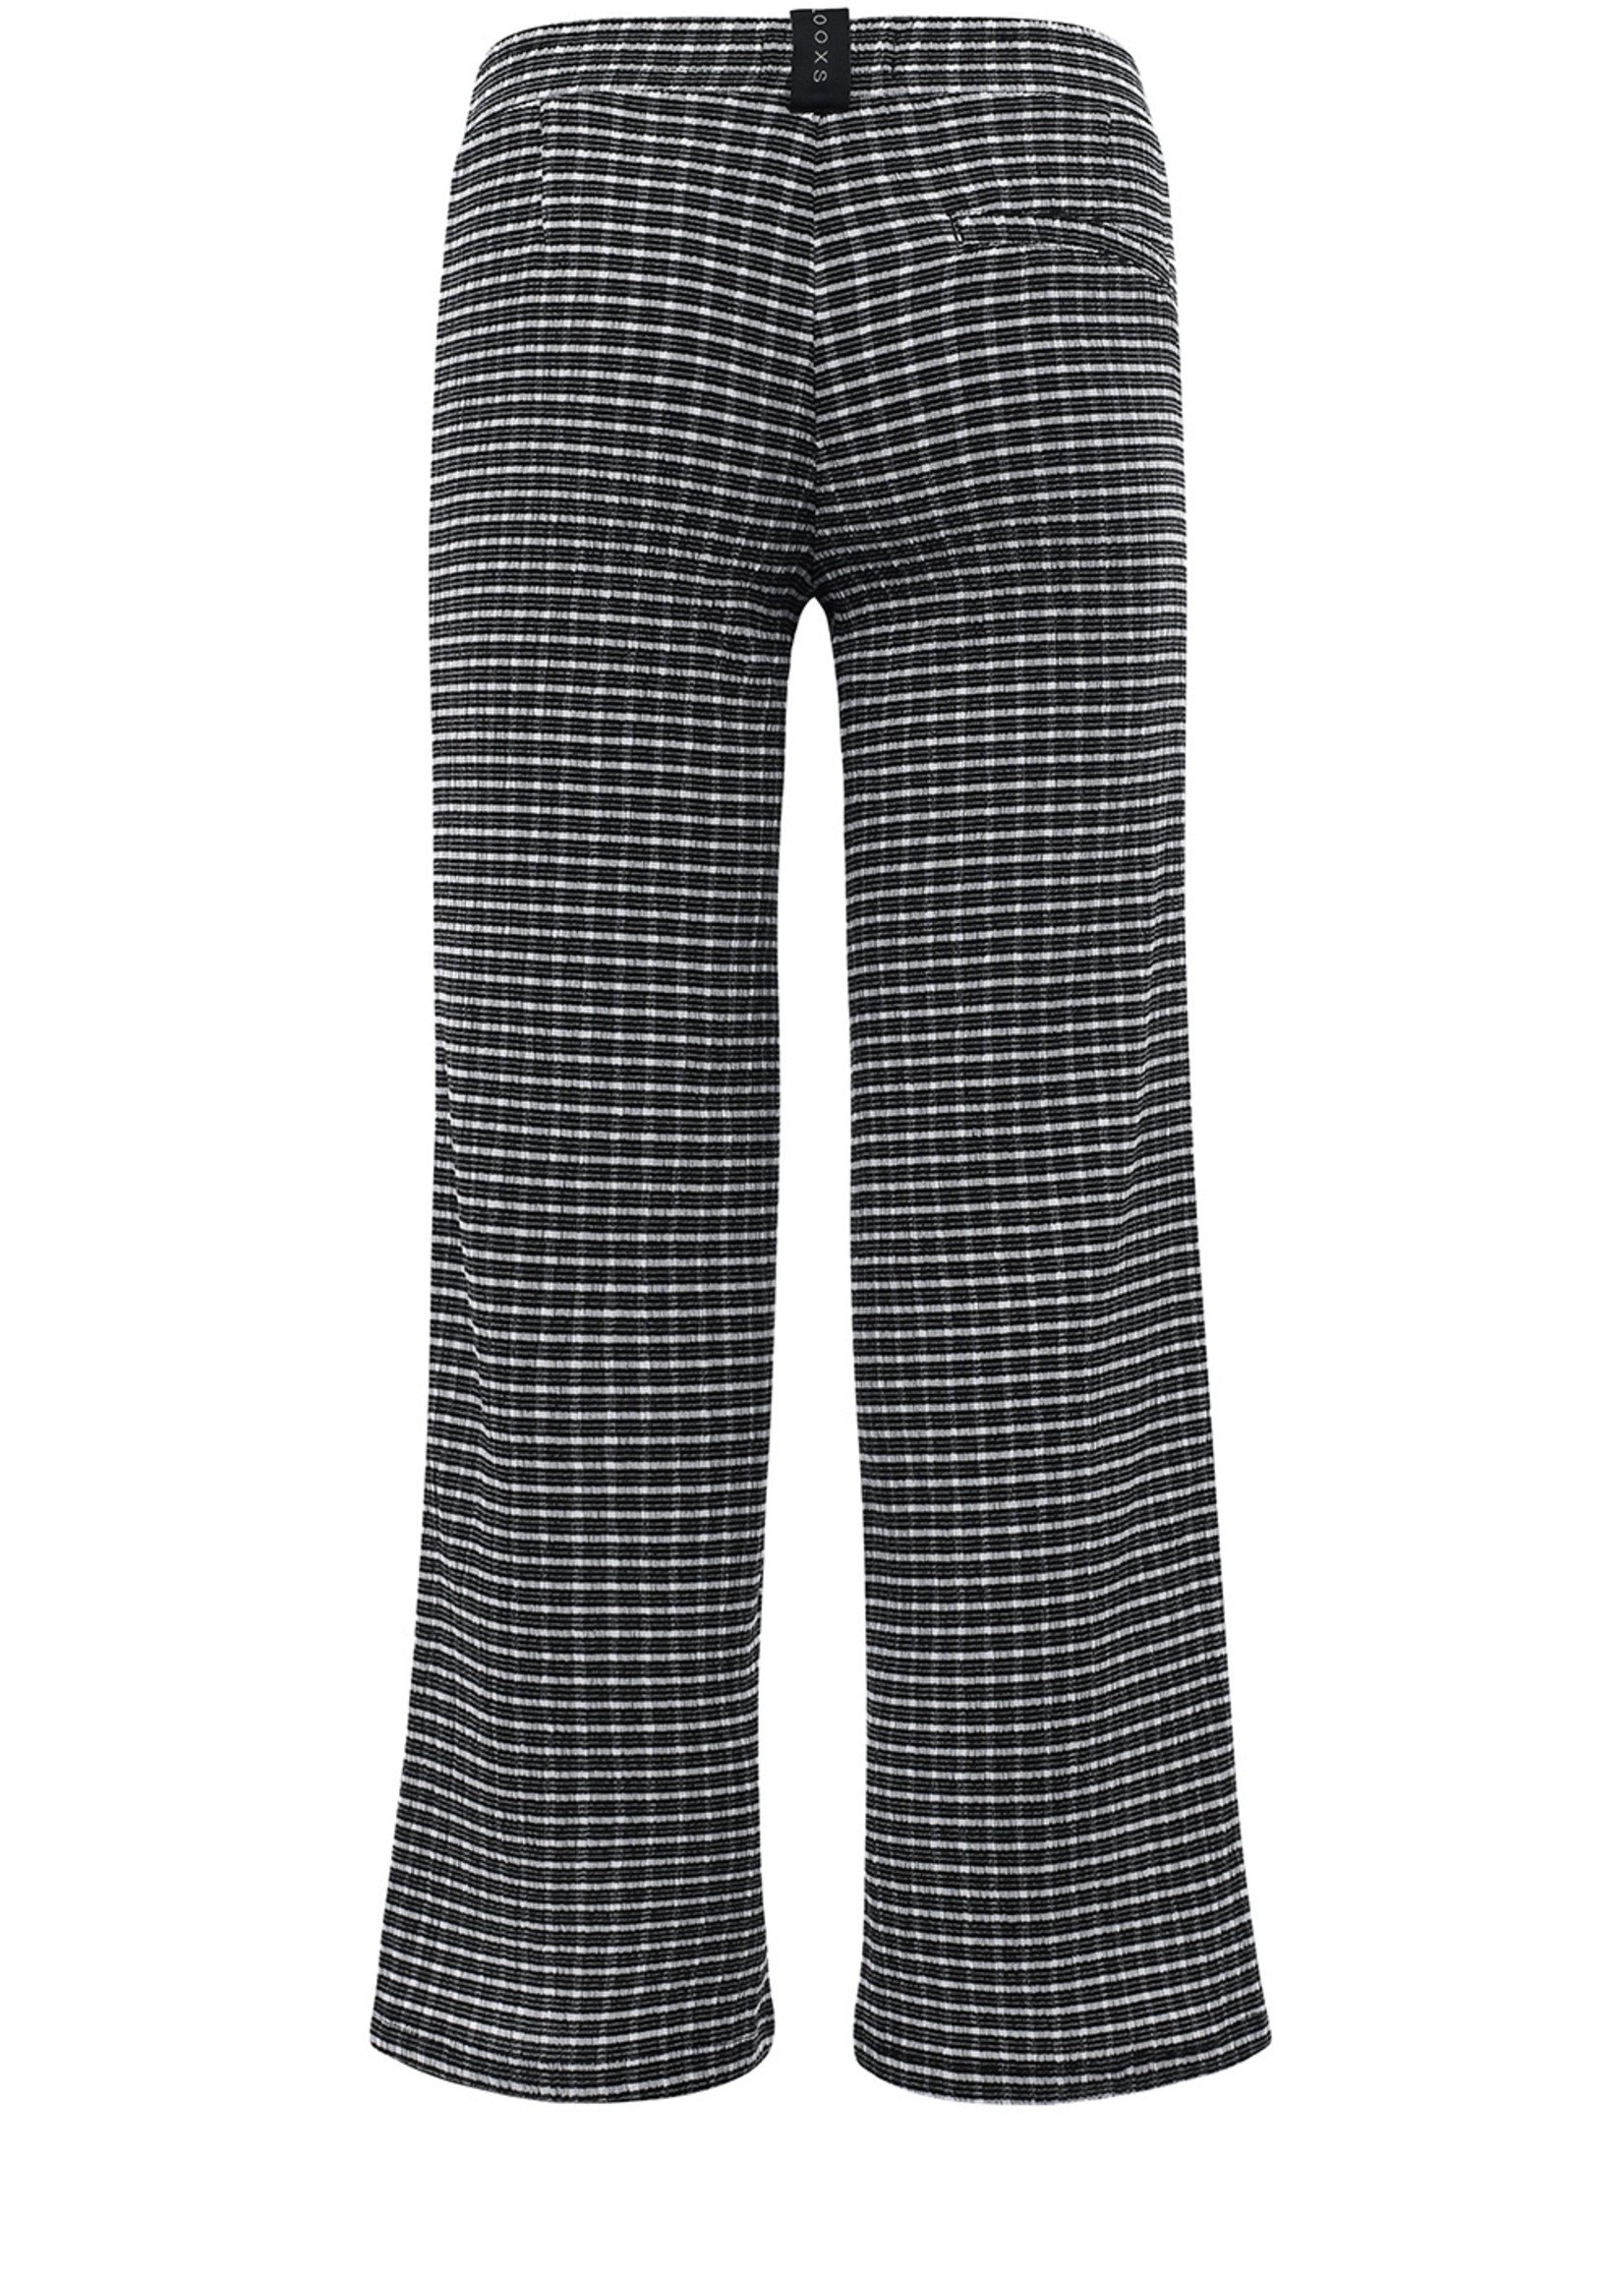 LOOXS 10sixteen 10Sixteen Check crinkle wide pants, check